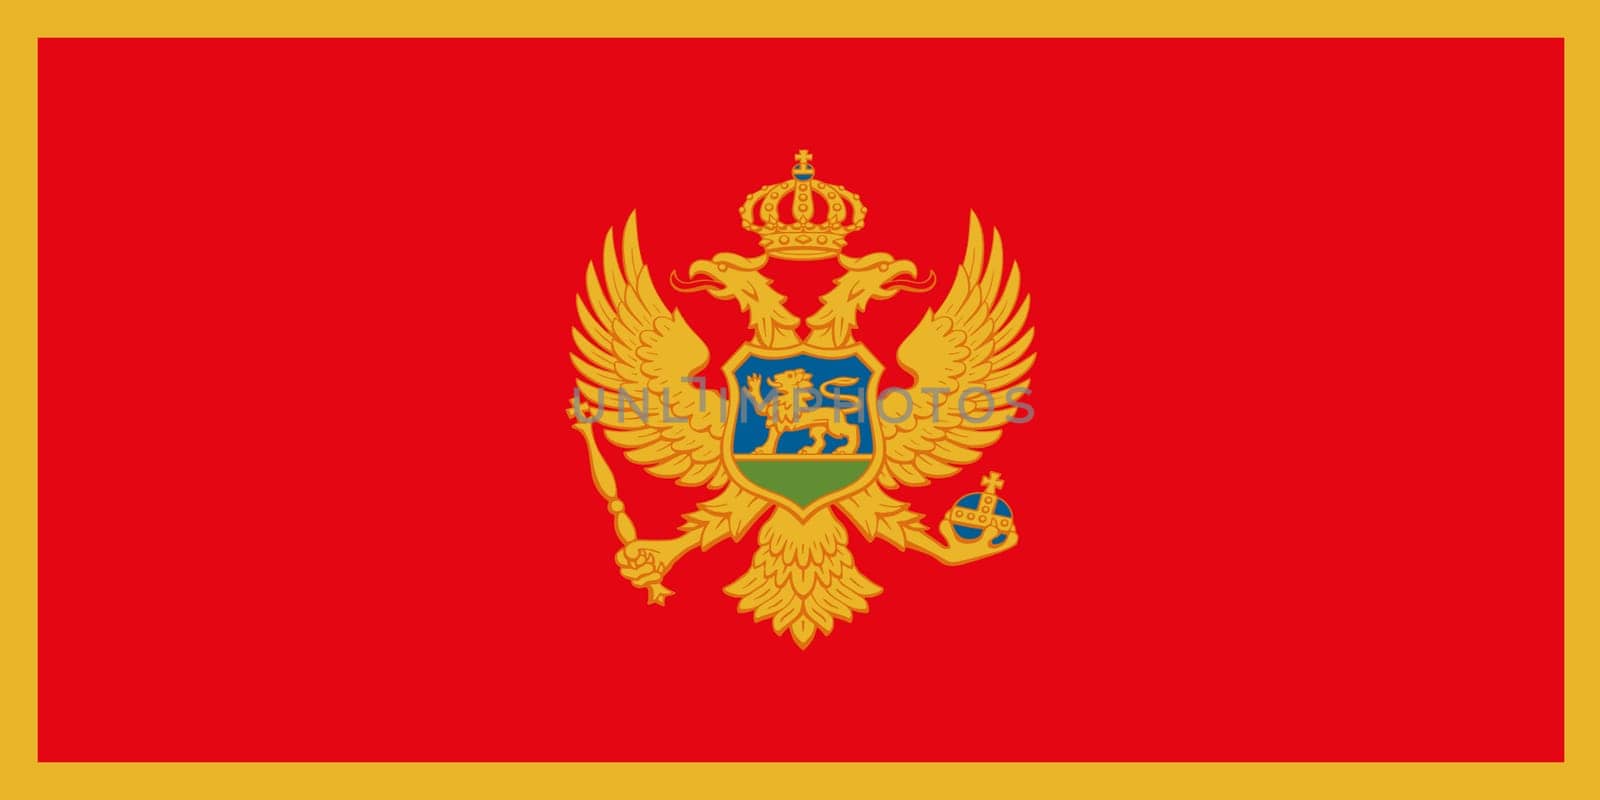 Montenegro flag background illustration red blue yellow crest by VivacityImages